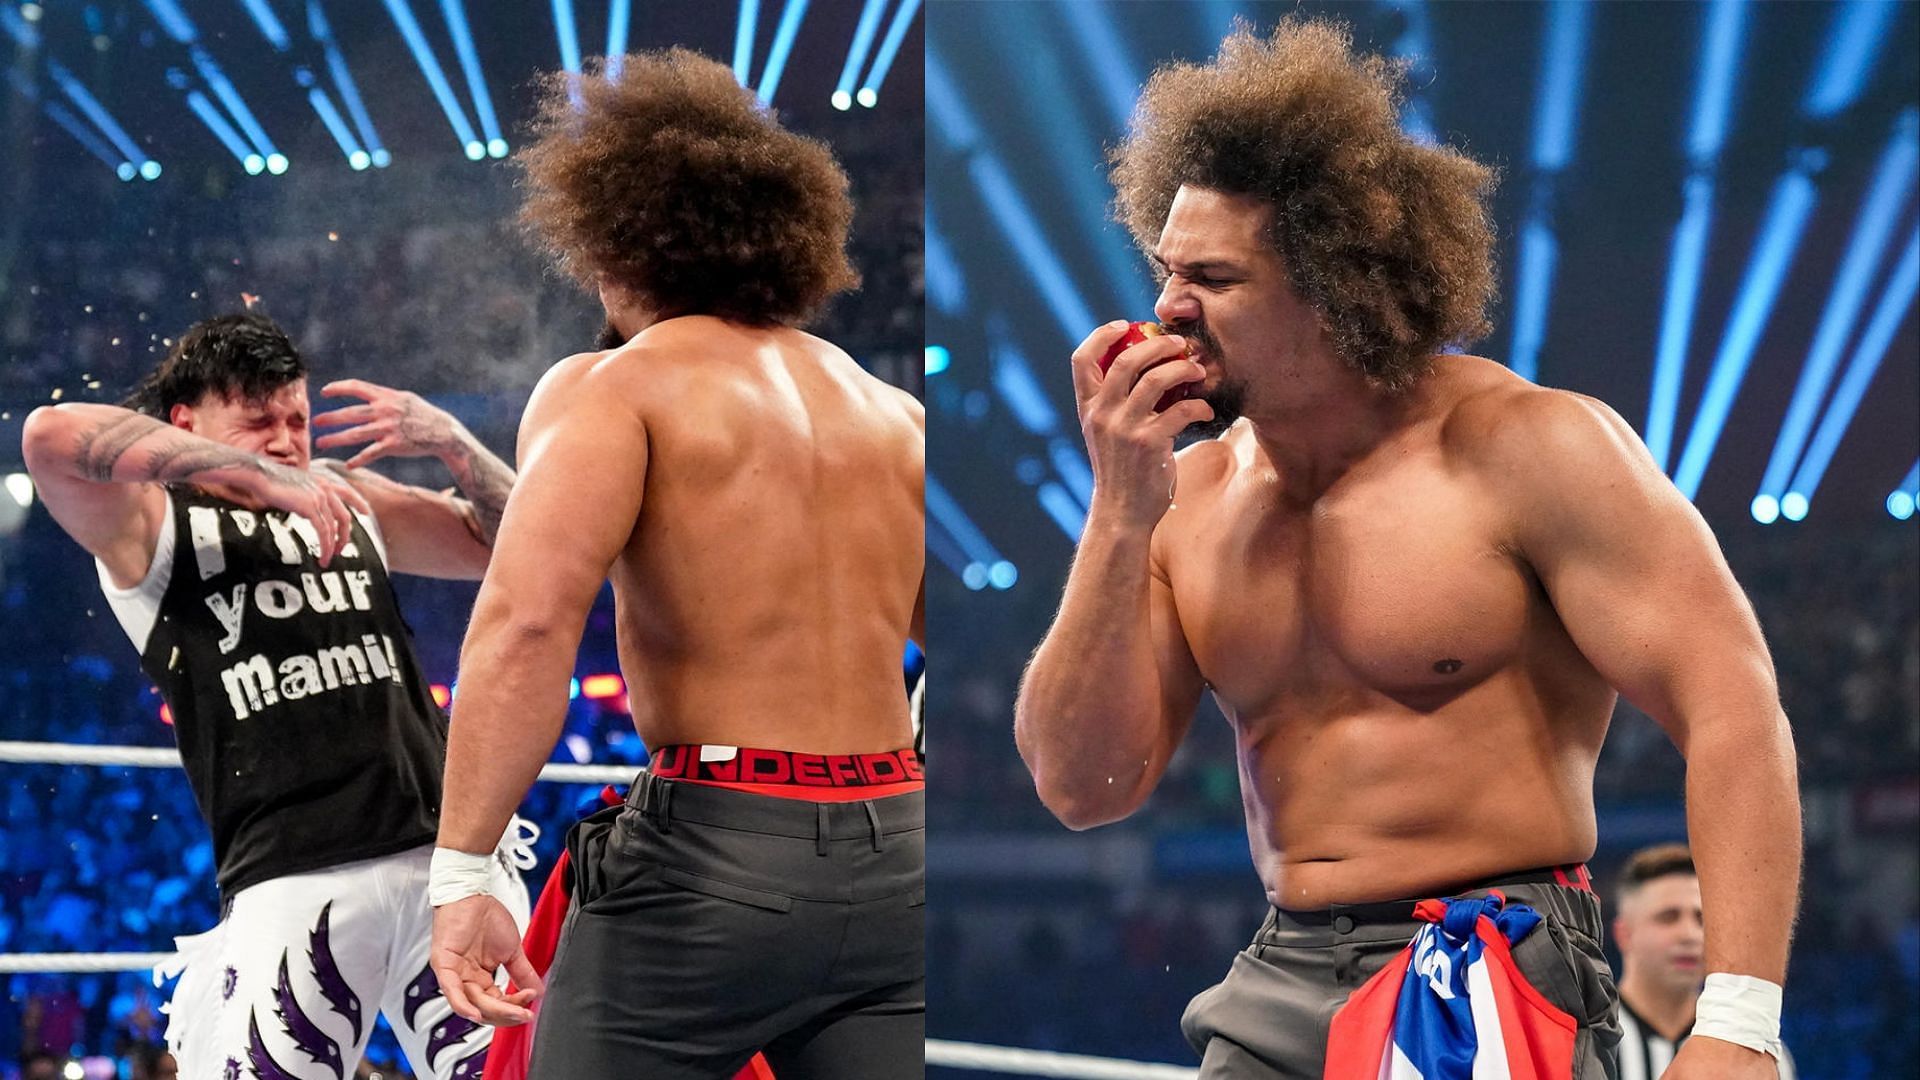 Carlito might be here to stay in WWE